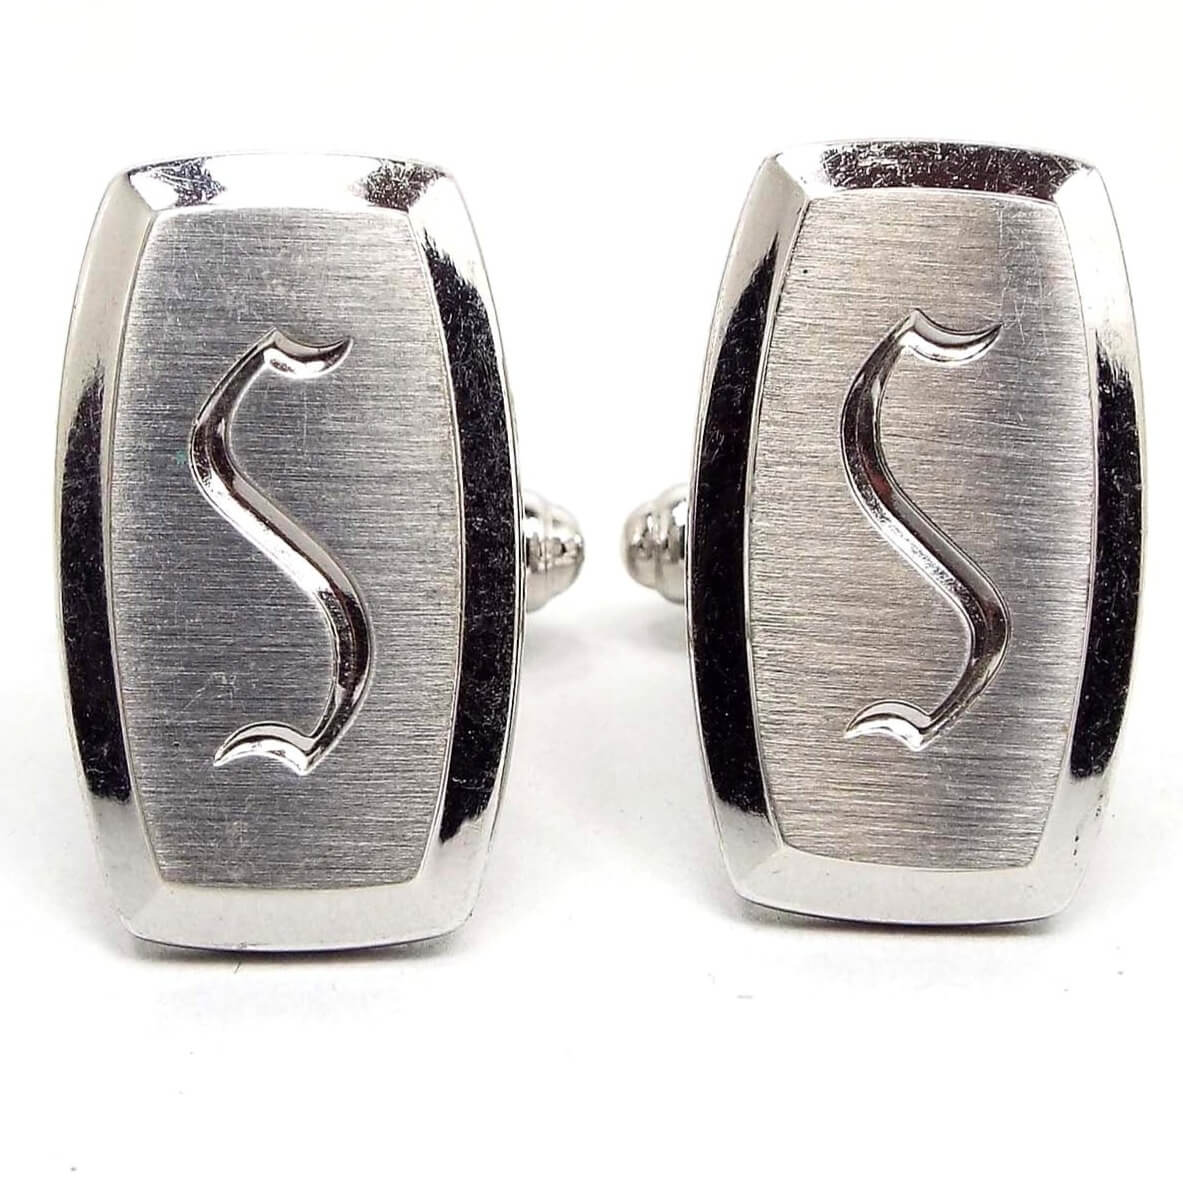 Front view of the Mid Century vintage Hickok initial cufflinks. They are silver tone in color and have a rounded edge rectangle shape. The front has matte brushed metal with the letter S engraved on in the middle.